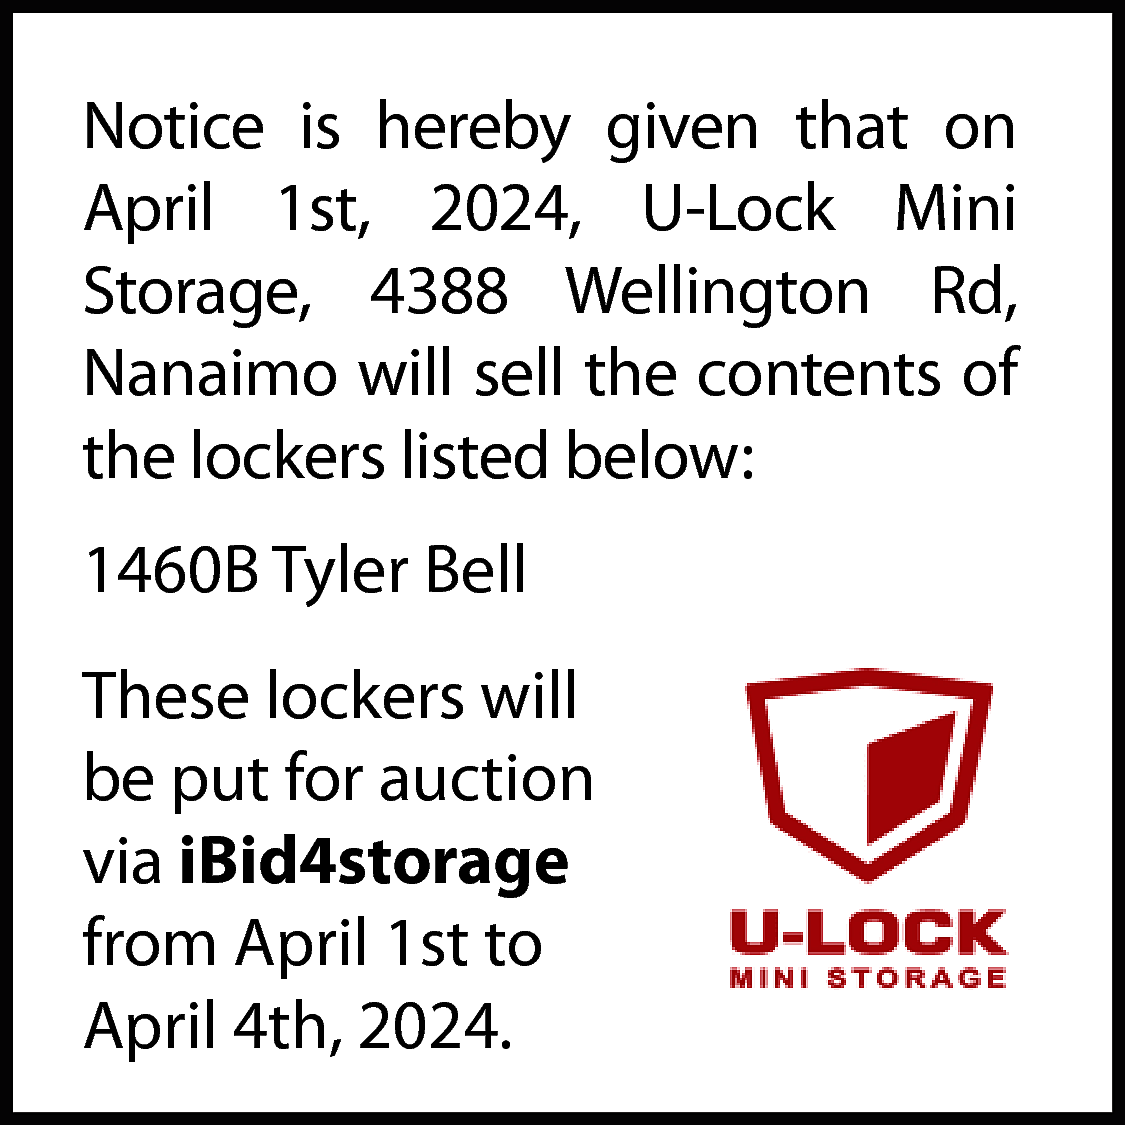 Notice is hereby given that  Notice is hereby given that on  April 1st, 2024, U-Lock Mini  Storage, 4388 Wellington Rd,  Nanaimo will sell the contents of  the lockers listed below:  1460B Tyler Bell  These lockers will  be put for auction  via iBid4storage  from April 1st to  April 4th, 2024.    